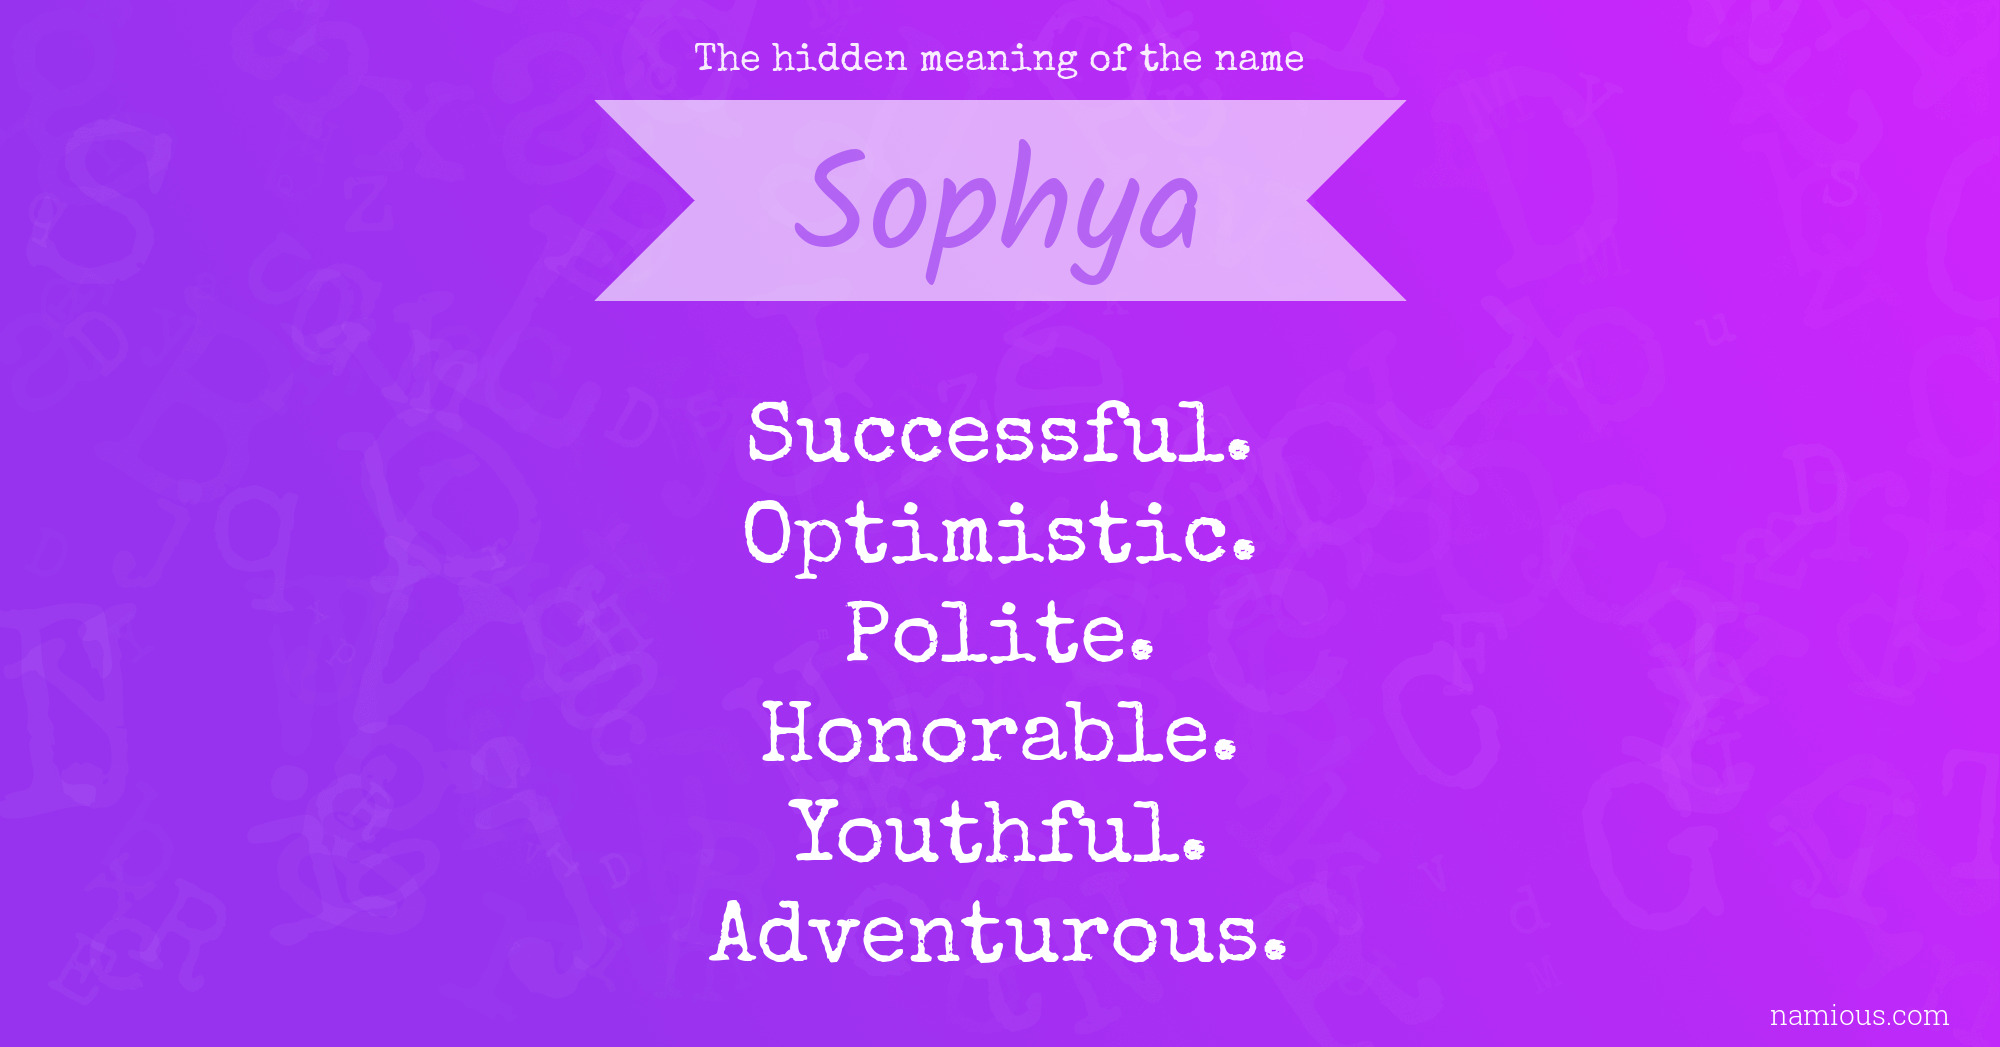 The hidden meaning of the name Sophya